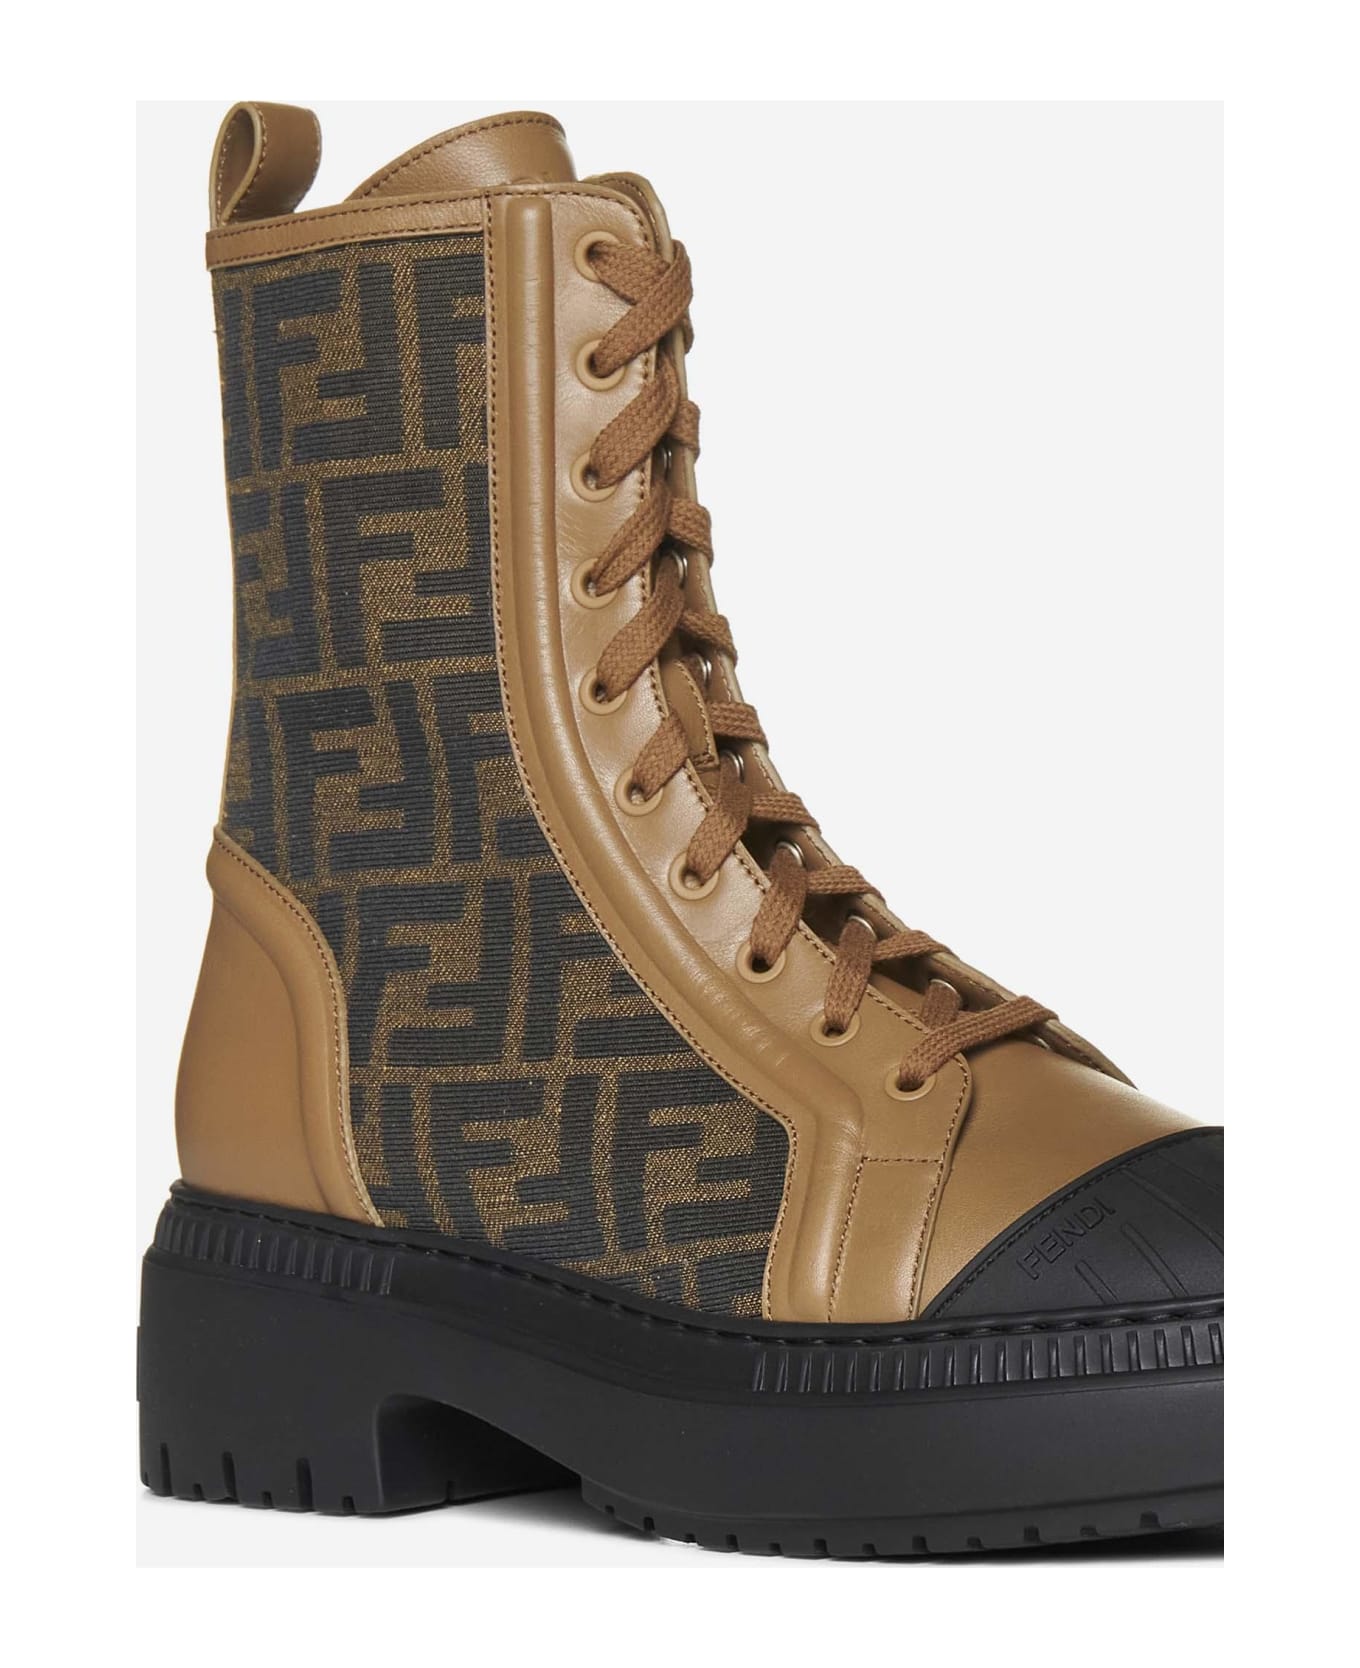 Fendi Domino Leather And Ff Fabric Ankle Boots - Cuoio